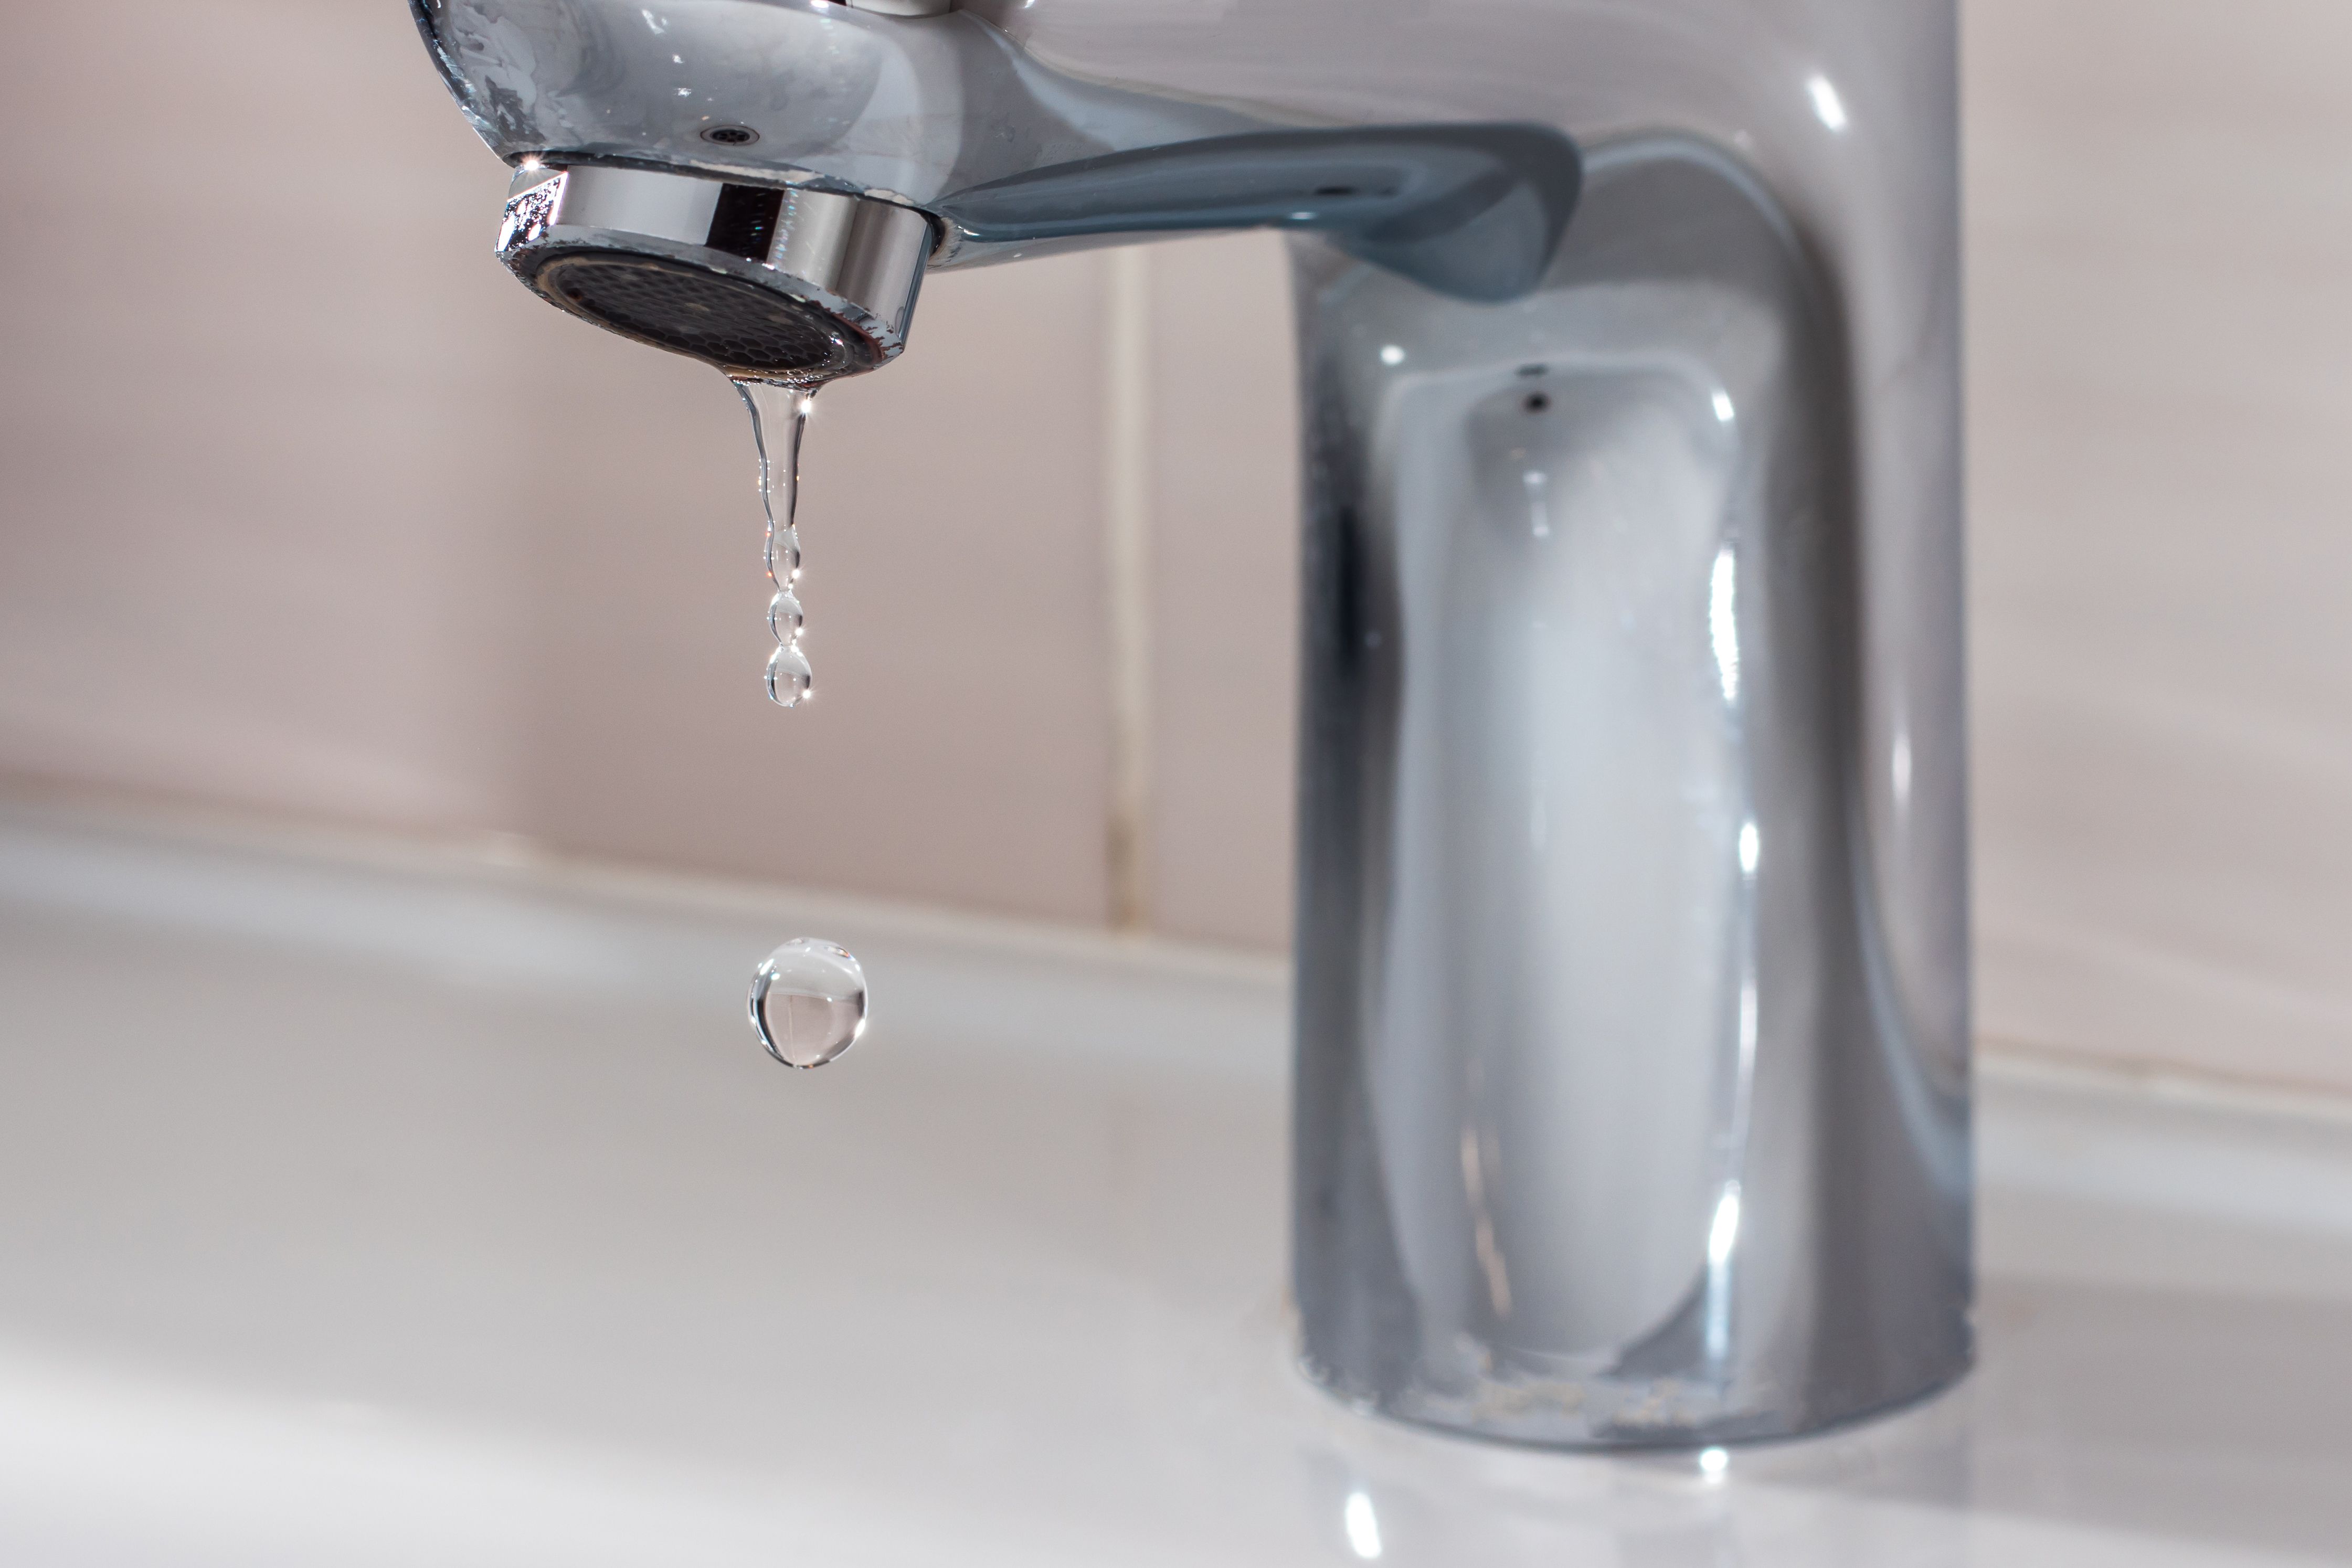 How to Fix a Leaky Faucet - 30 Easy Steps to Fix a Faucet